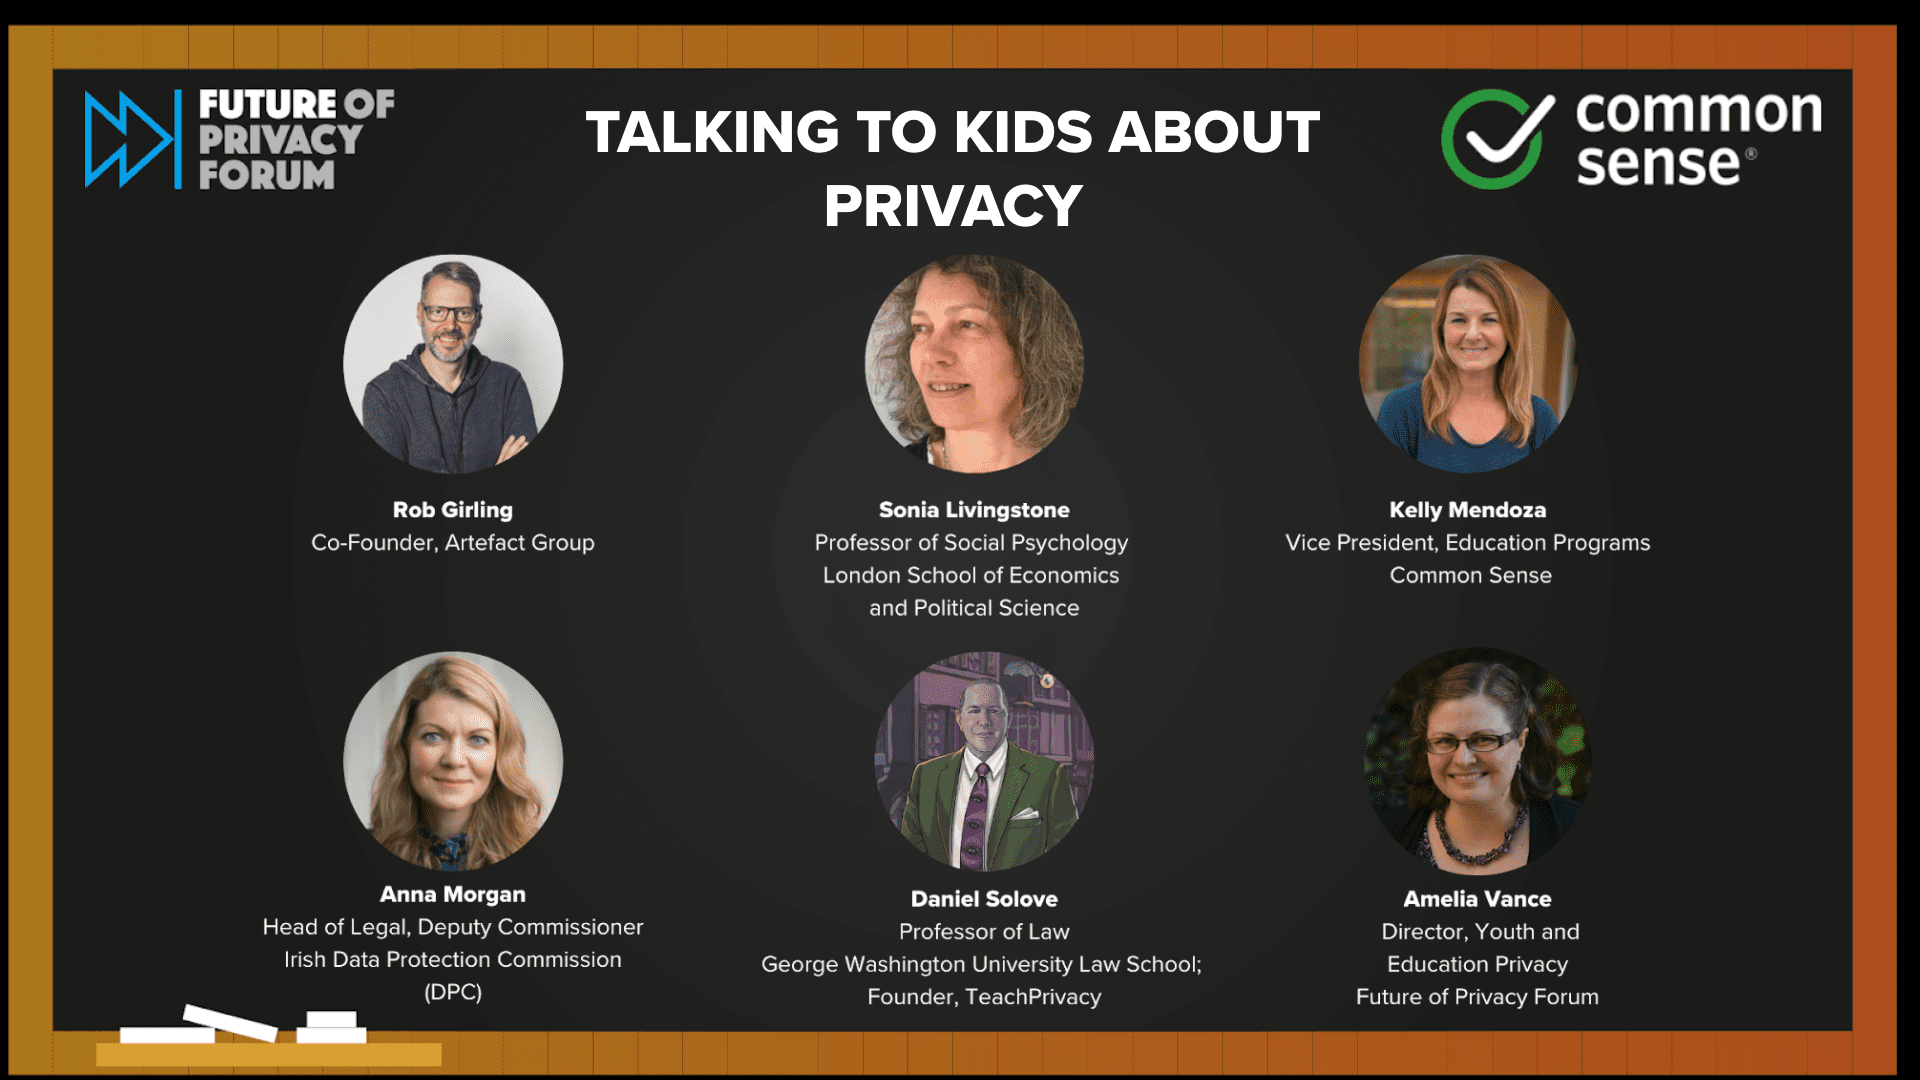 talking to kids about privacy event image with speaker's photos and titles